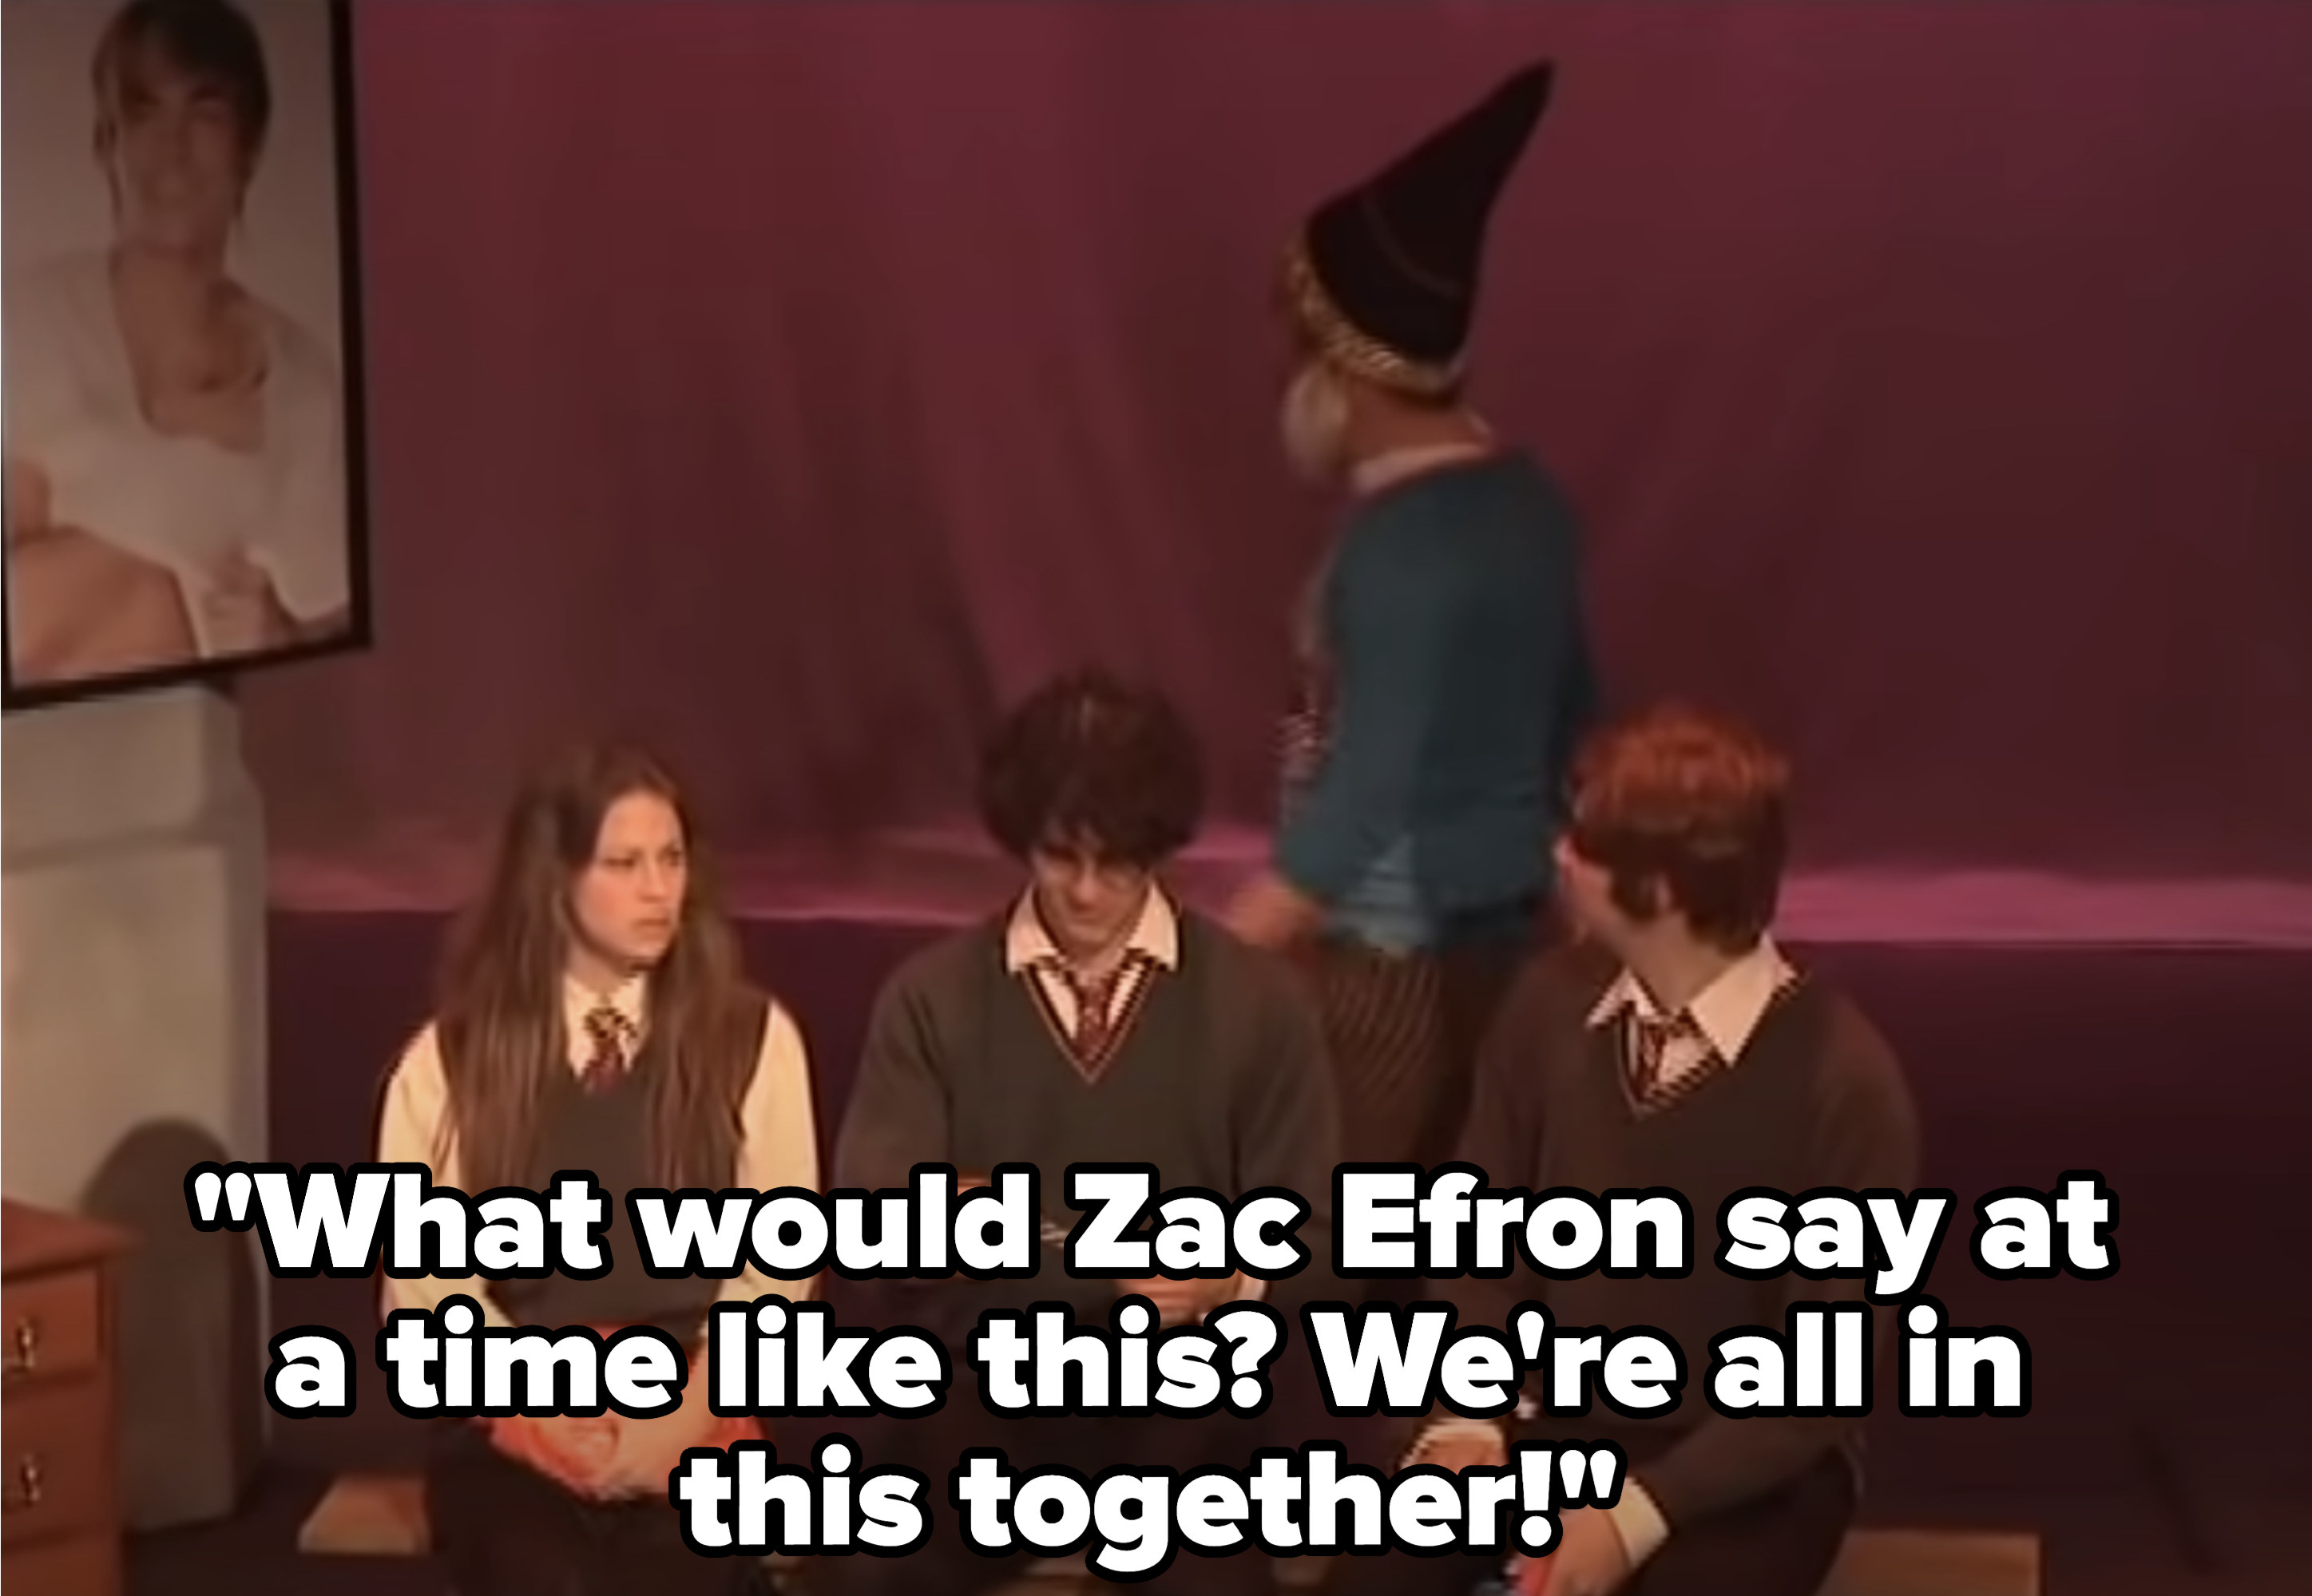 Dumbledore: &quot;What would Zac Efron say at a time like this? We&#x27;re all in this together!&quot;